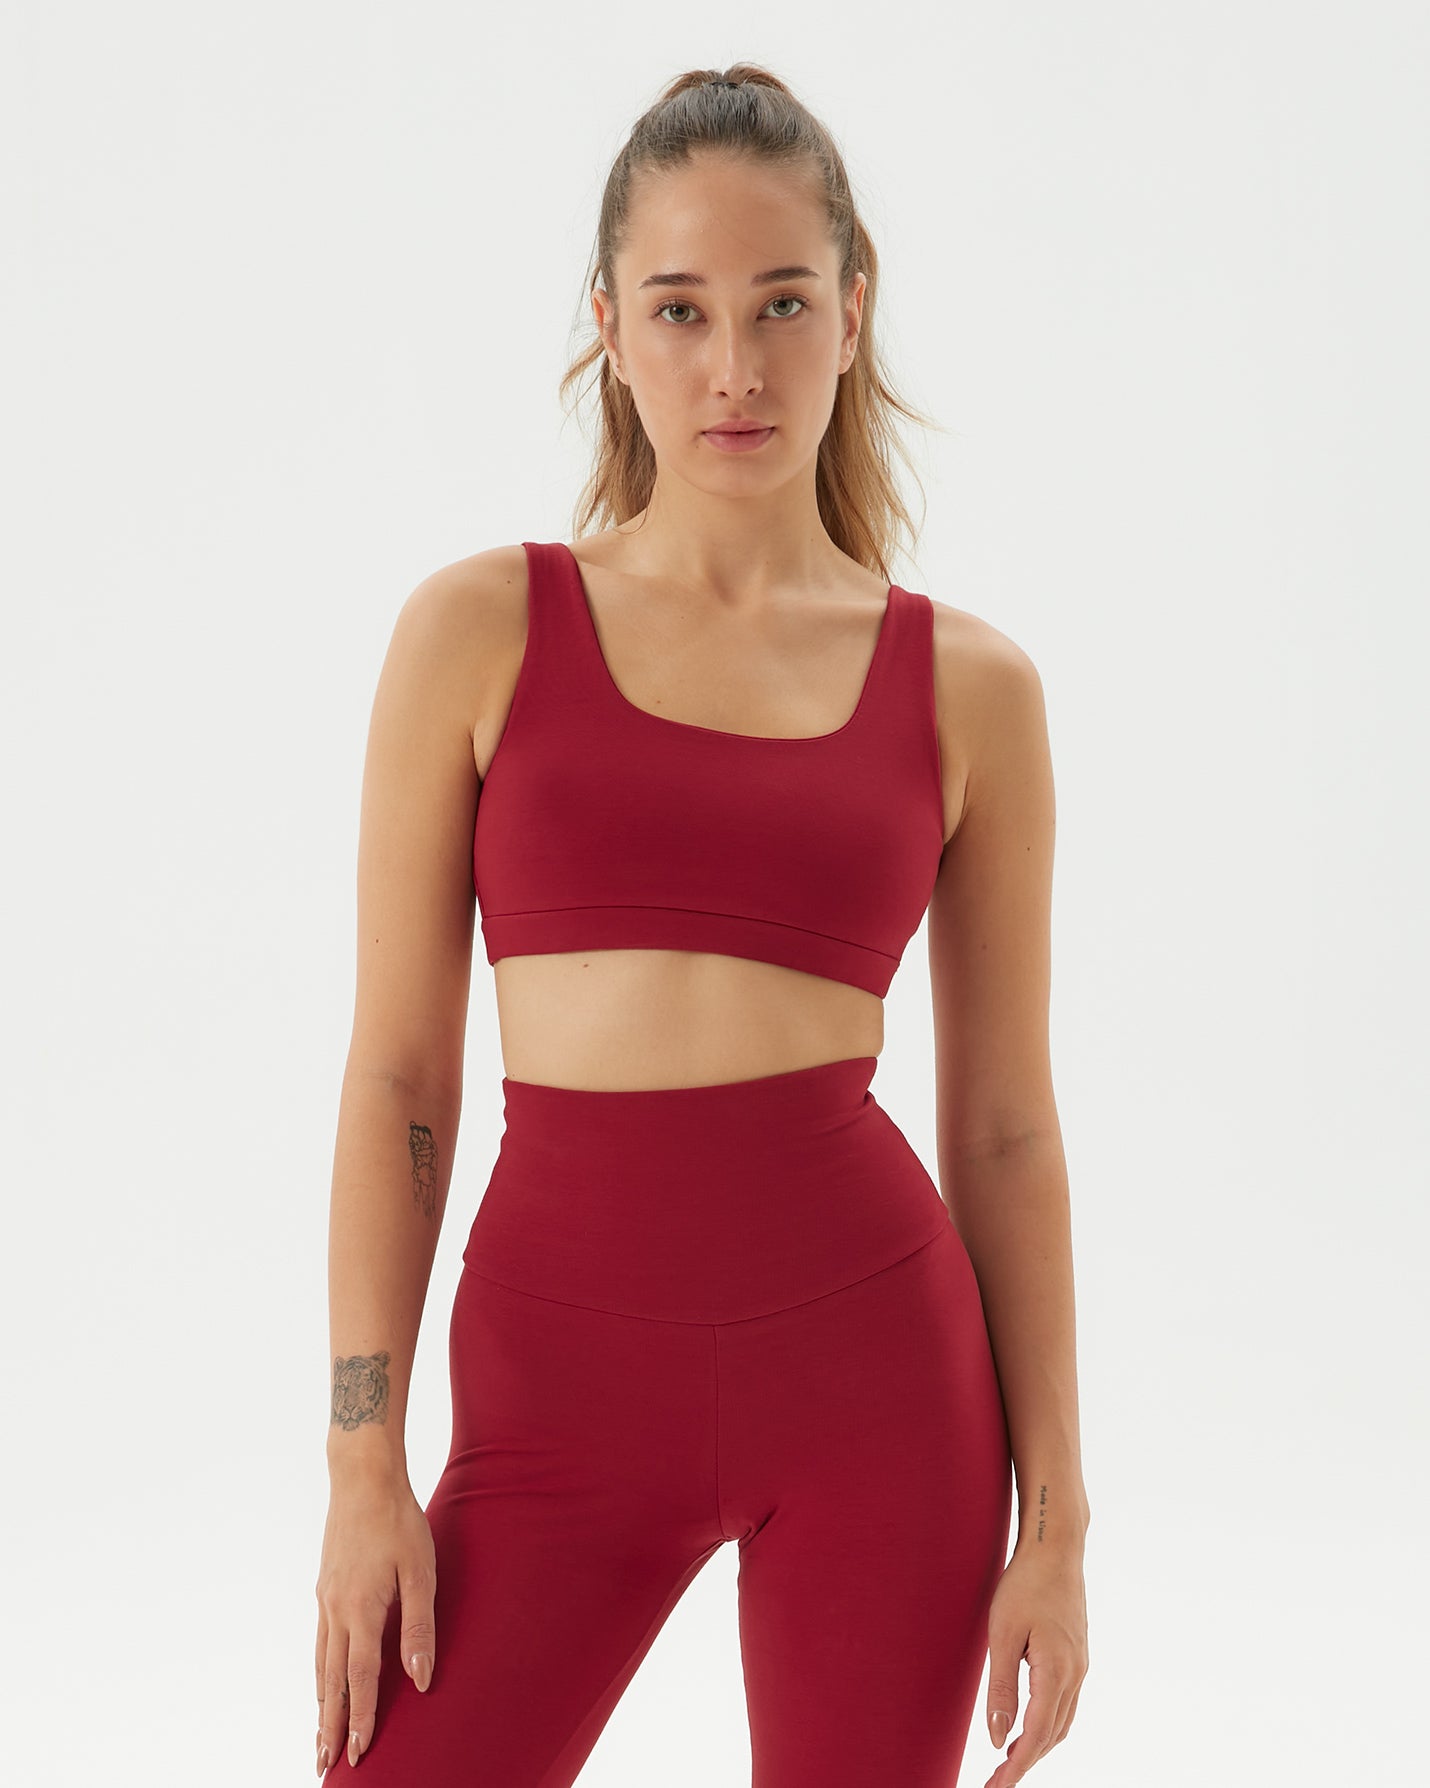 Organic Cotton Low Back Sports Bra – SIMPLE AS IS